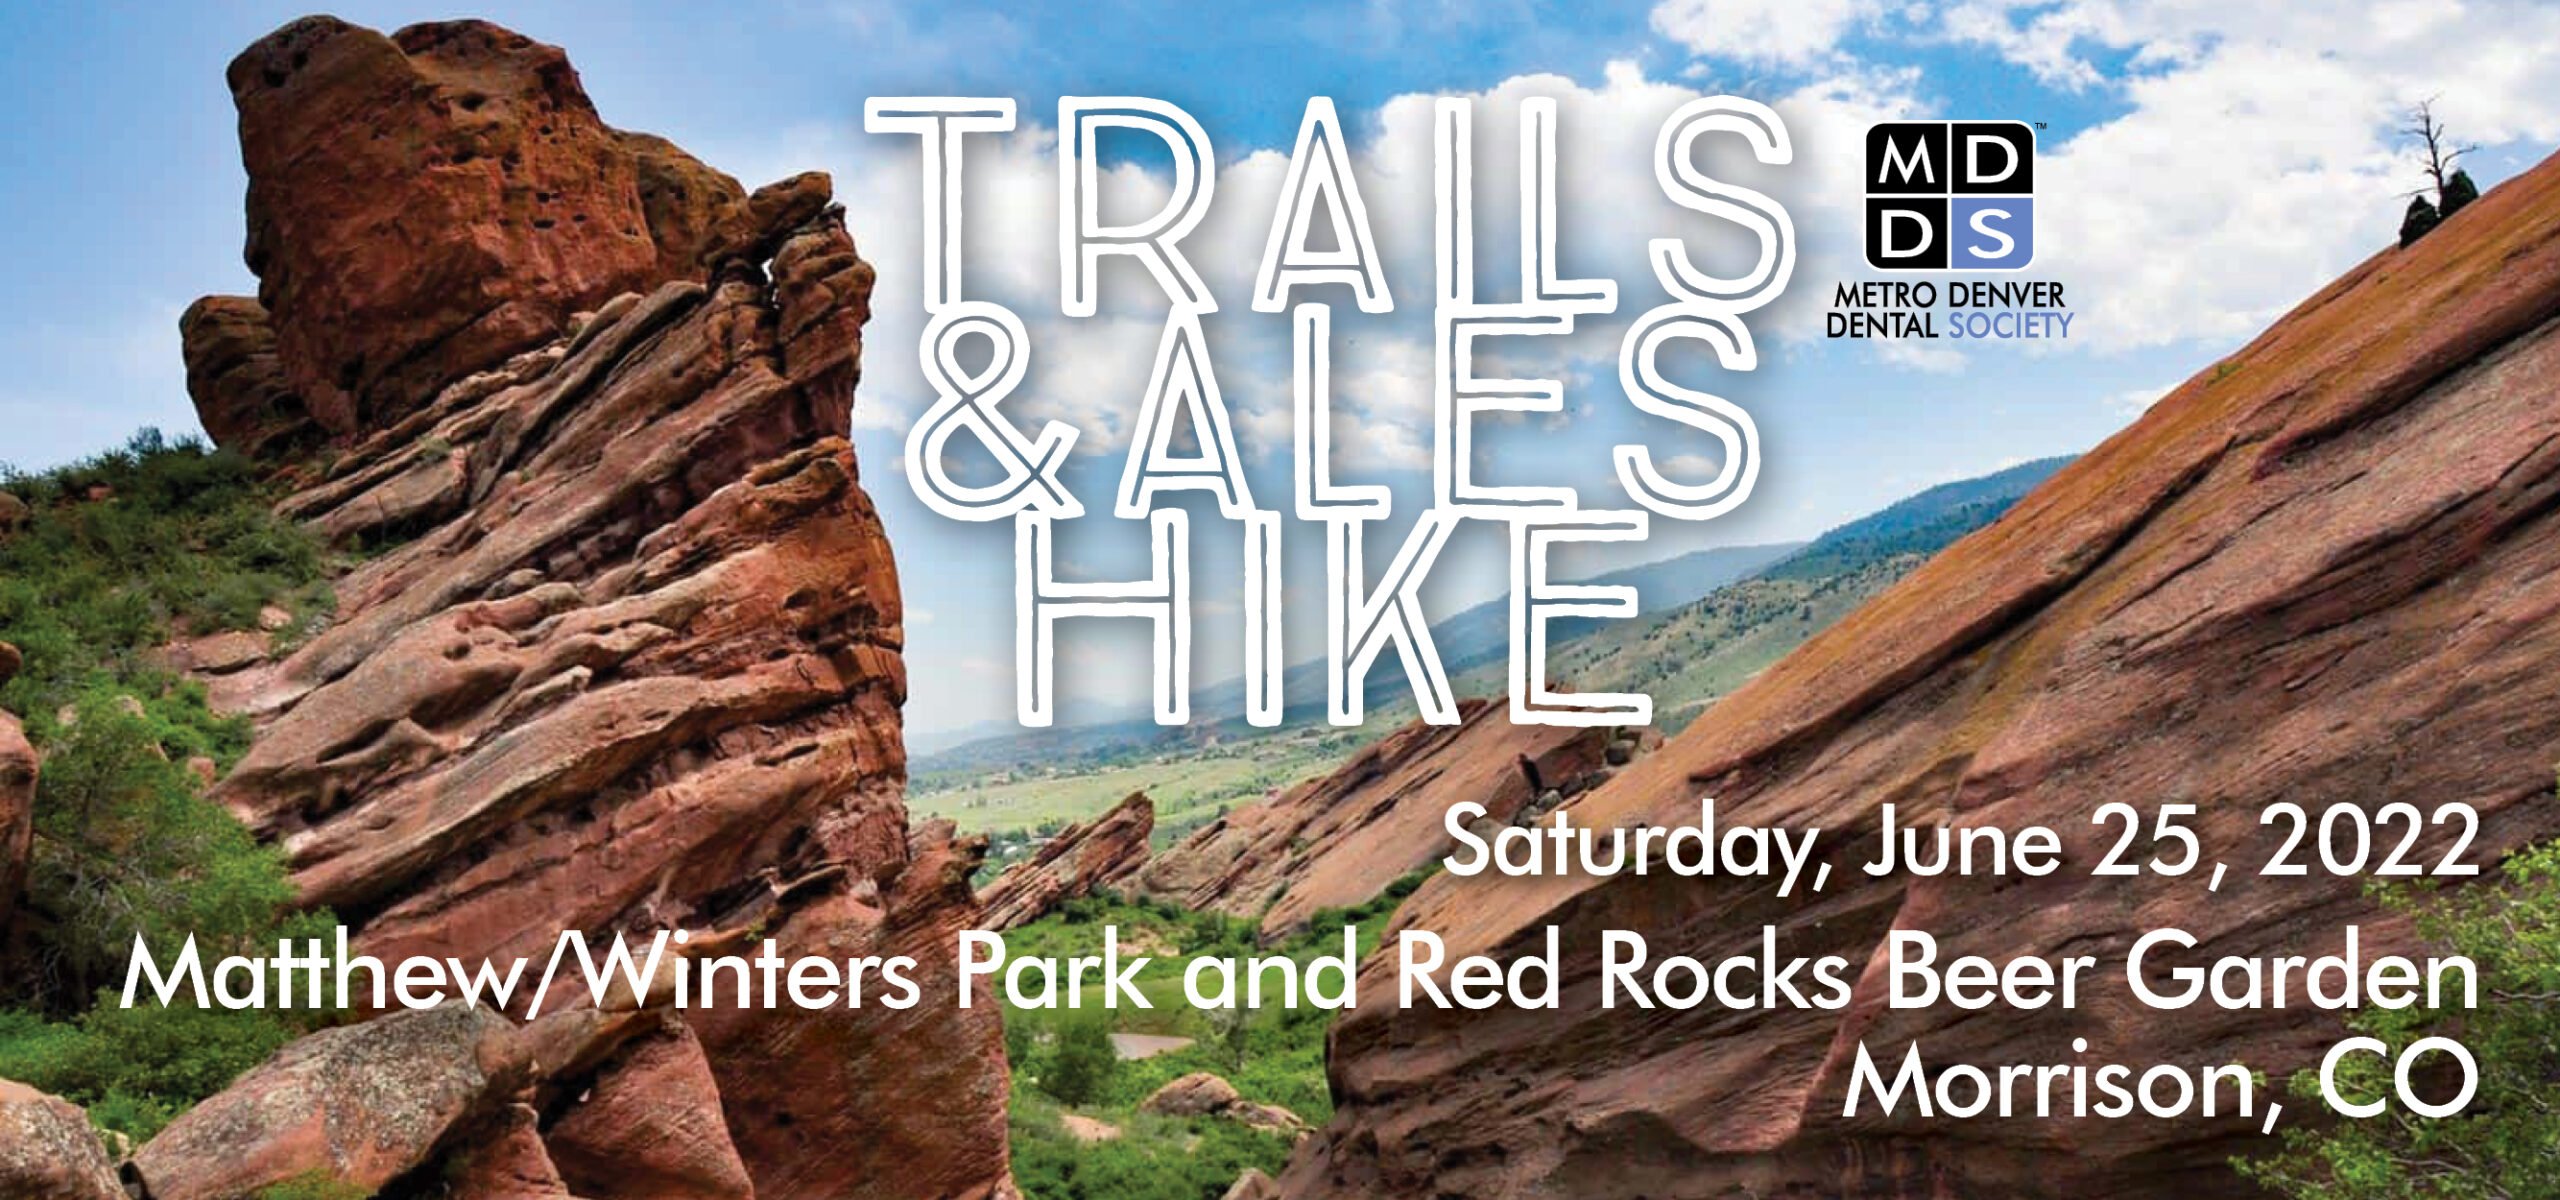 MDDS Trails and Ales Hike